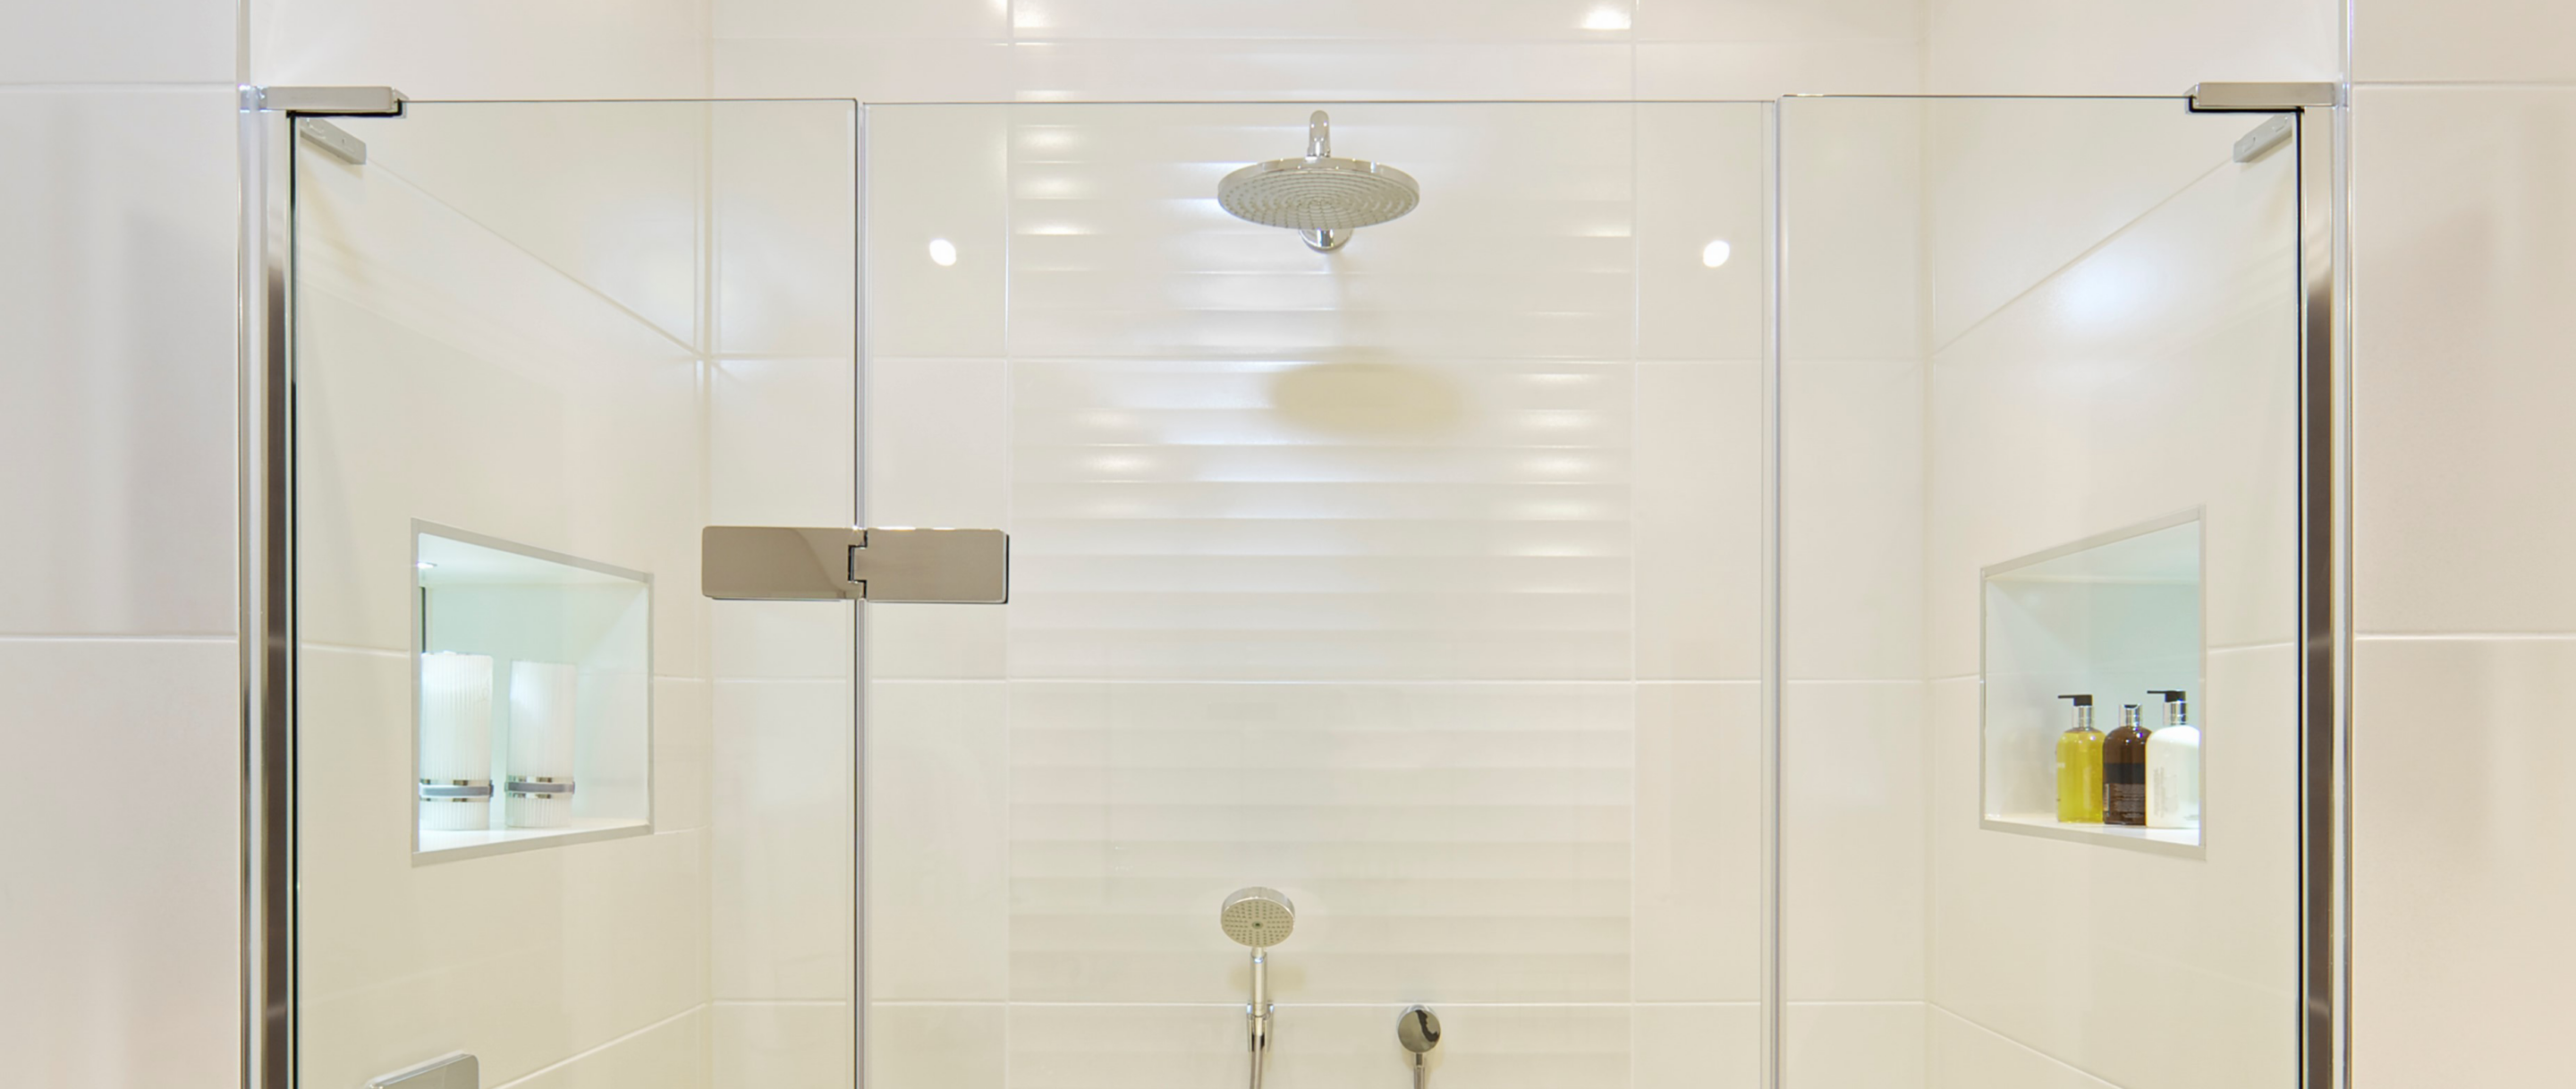 A+W Smart Shower - Design and visualize showers intelligently